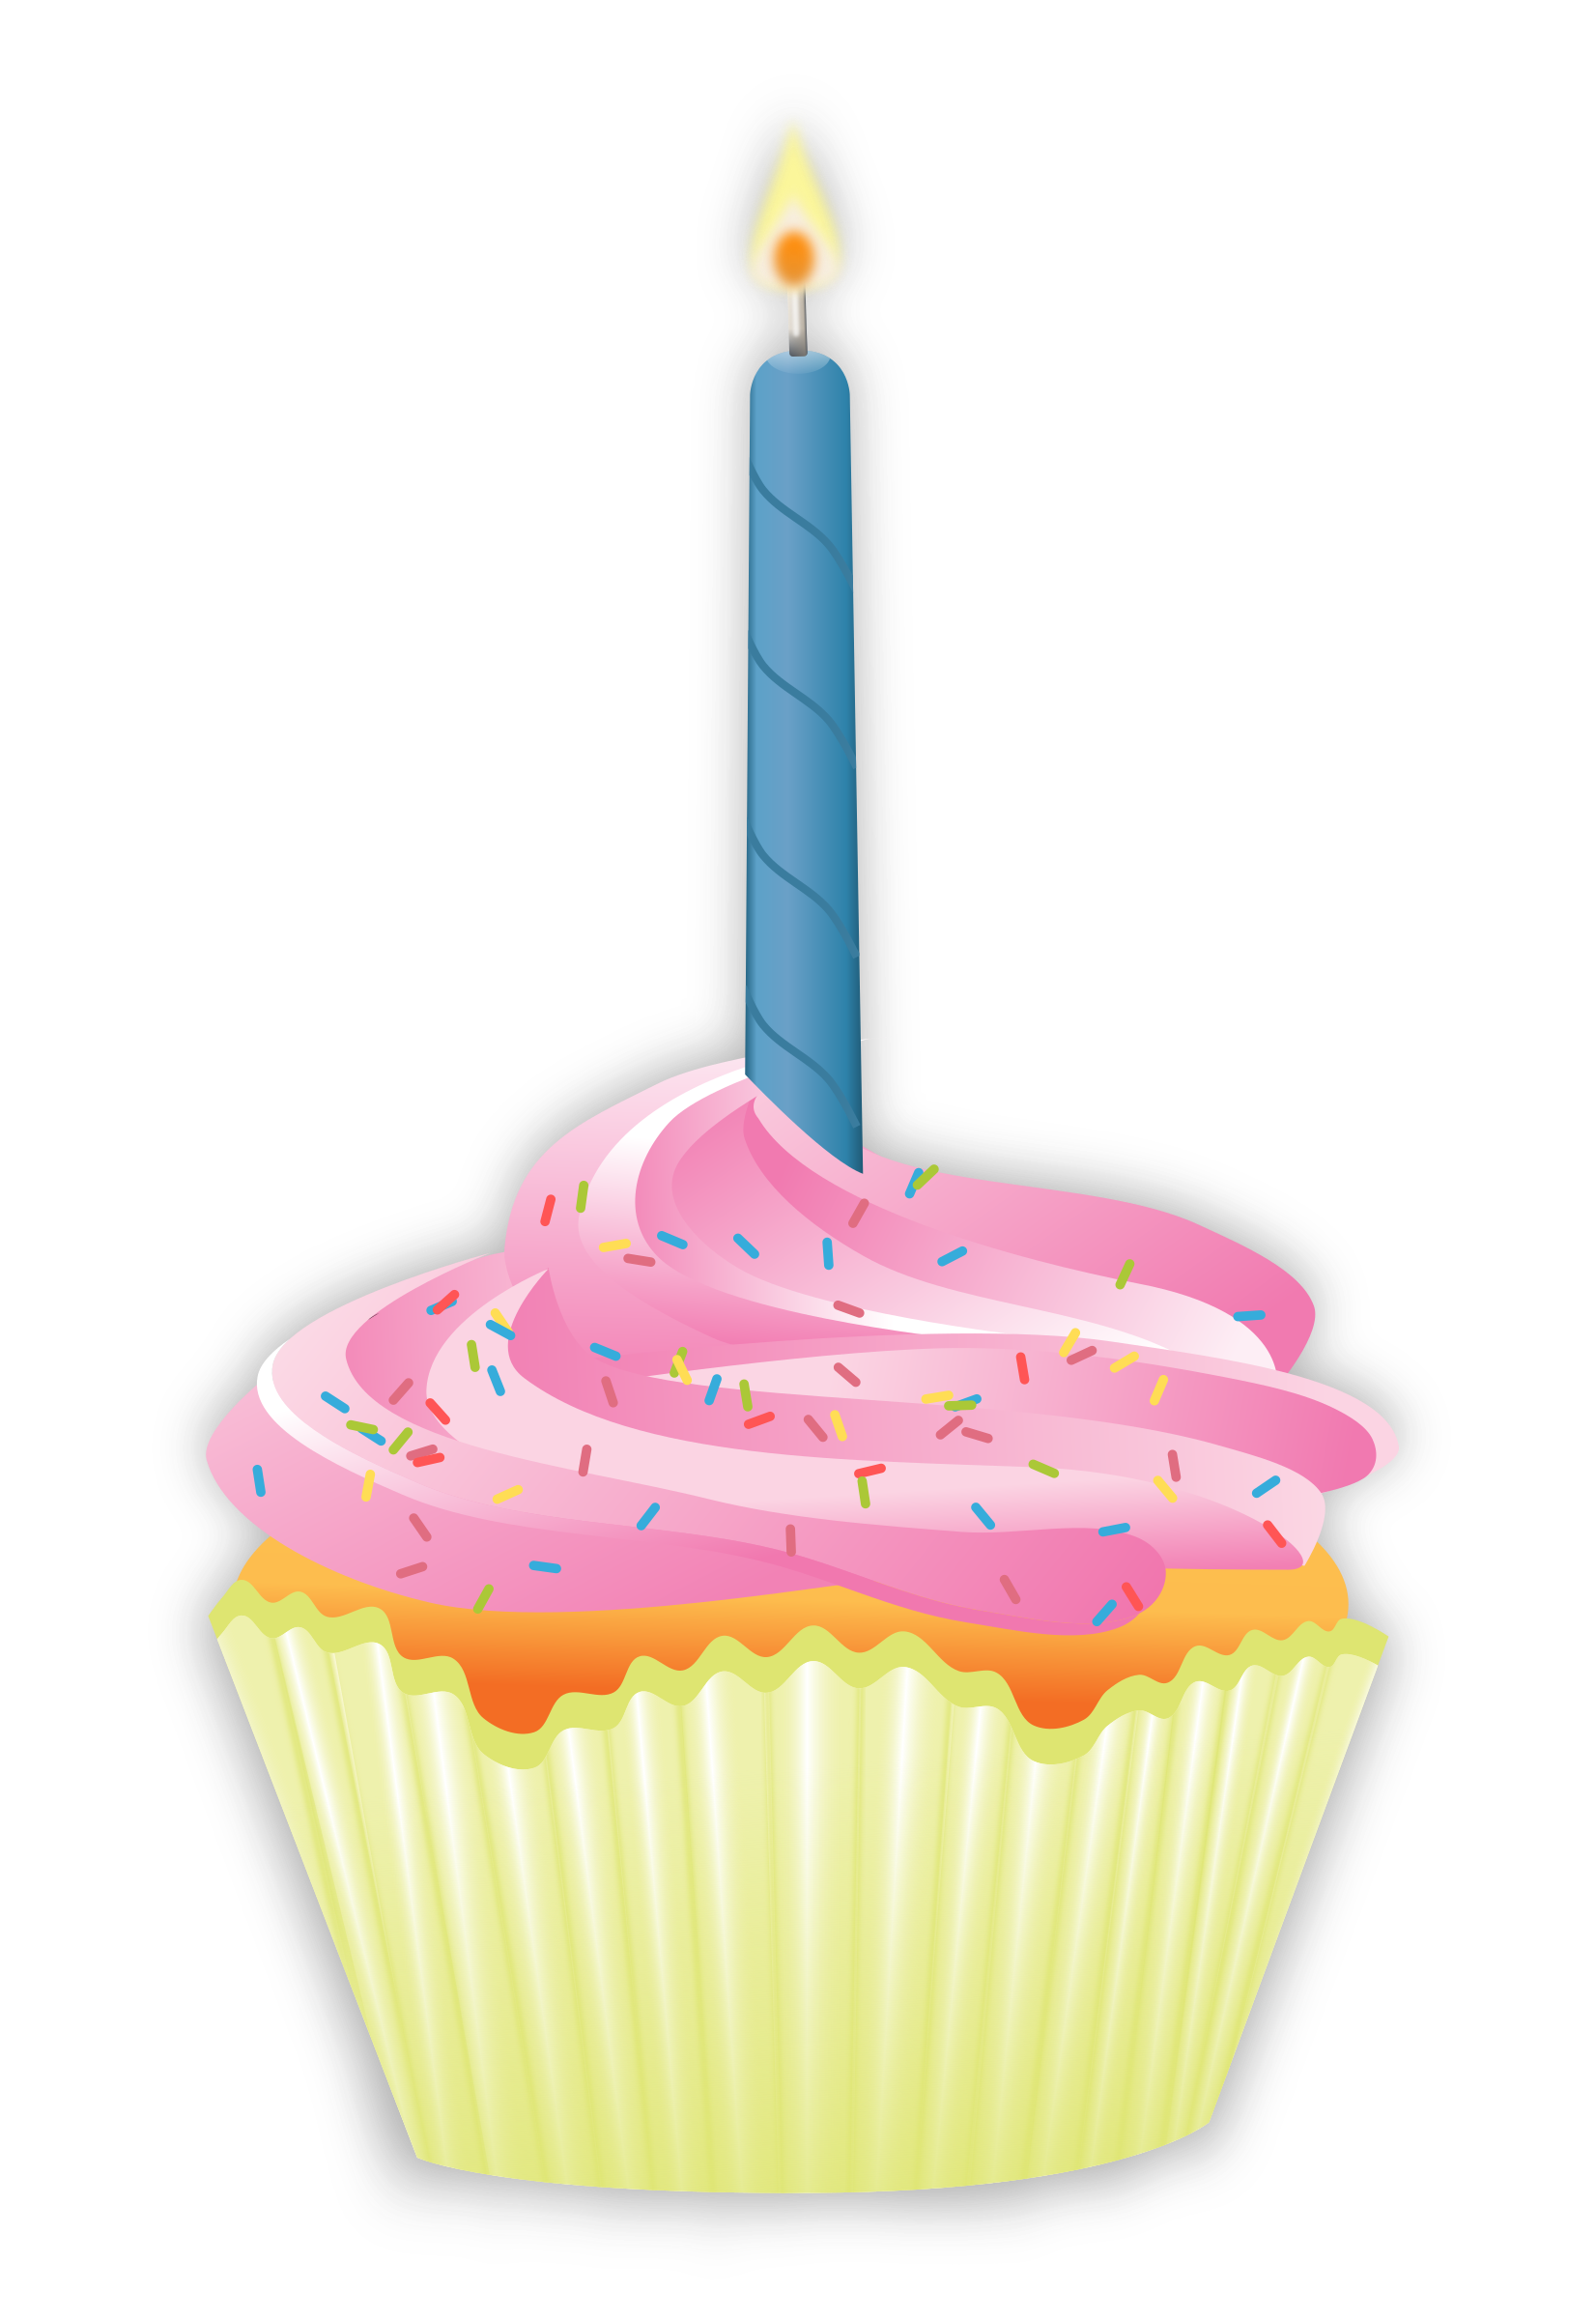 Cupcake Birthday cake Muffin Clip art cup cake png download 1652*